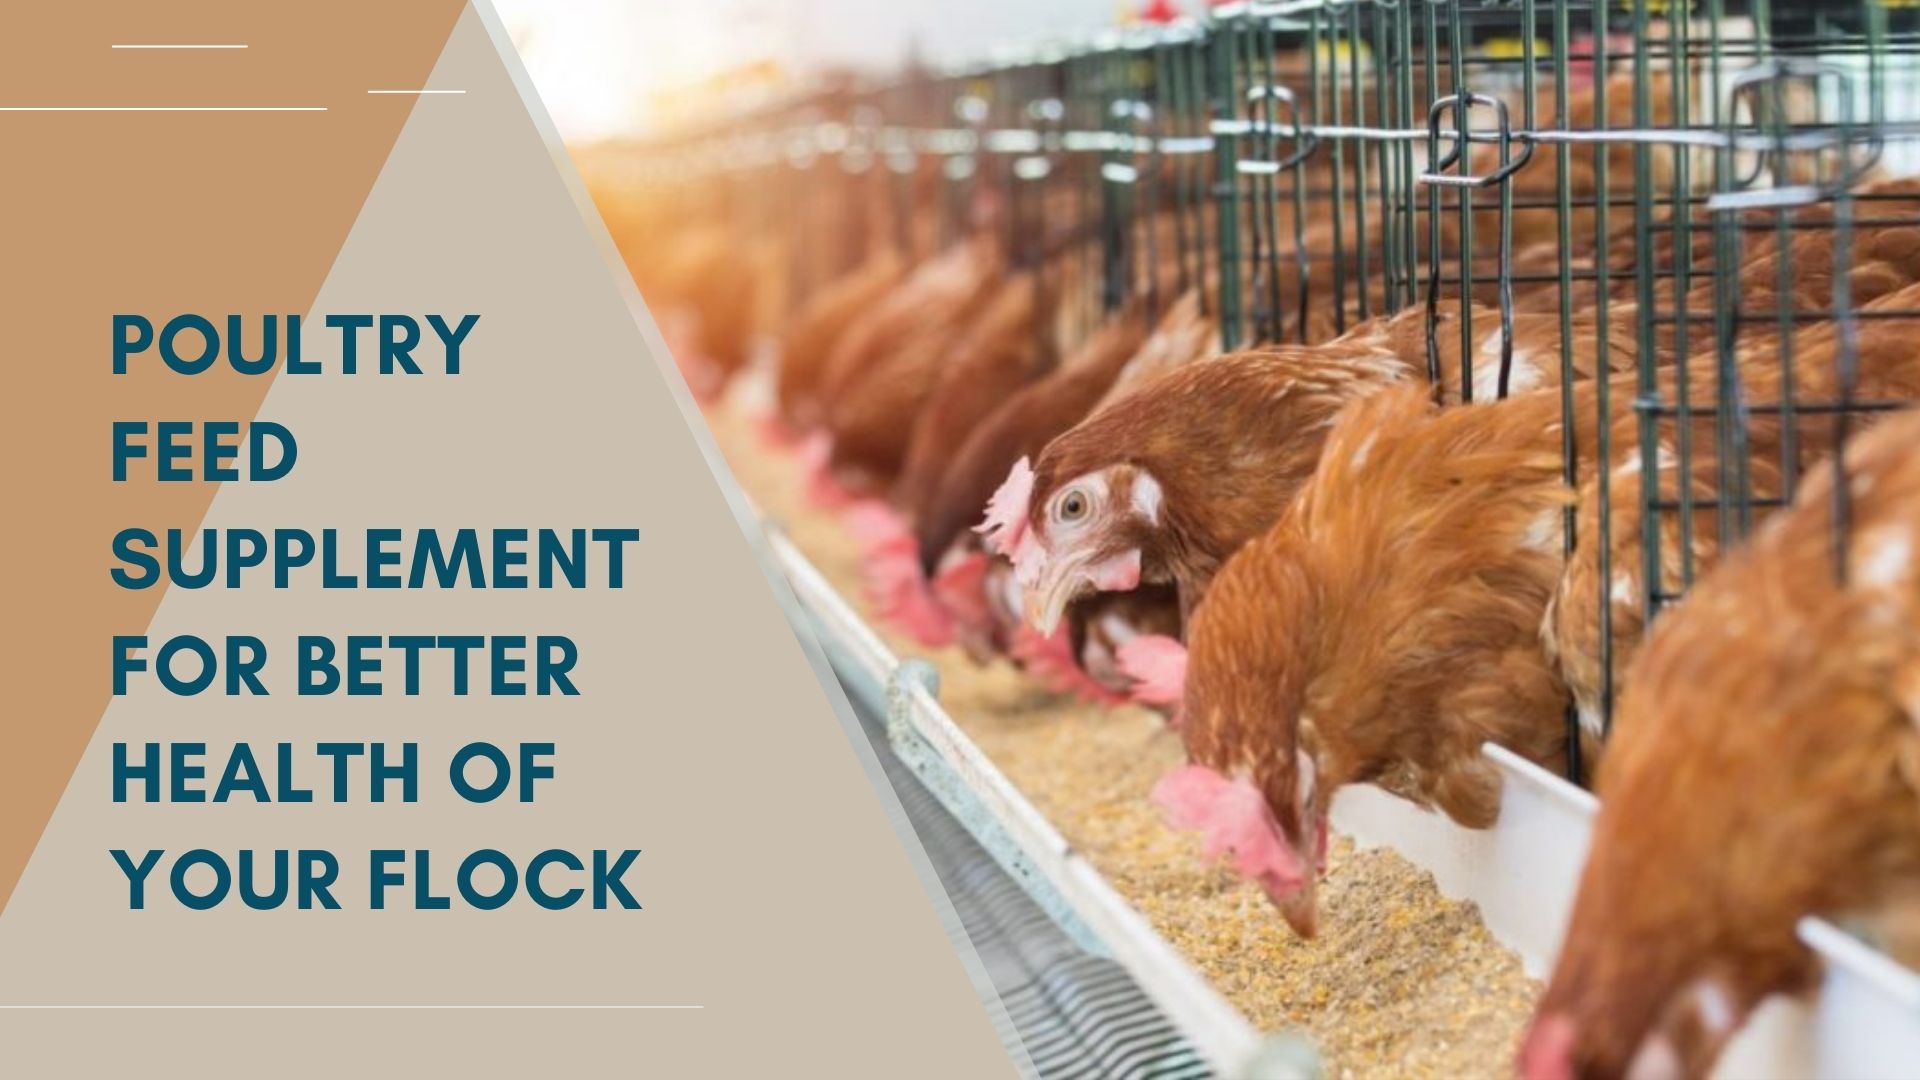 Poultry Feed Supplement For Better Health Of Your Flock